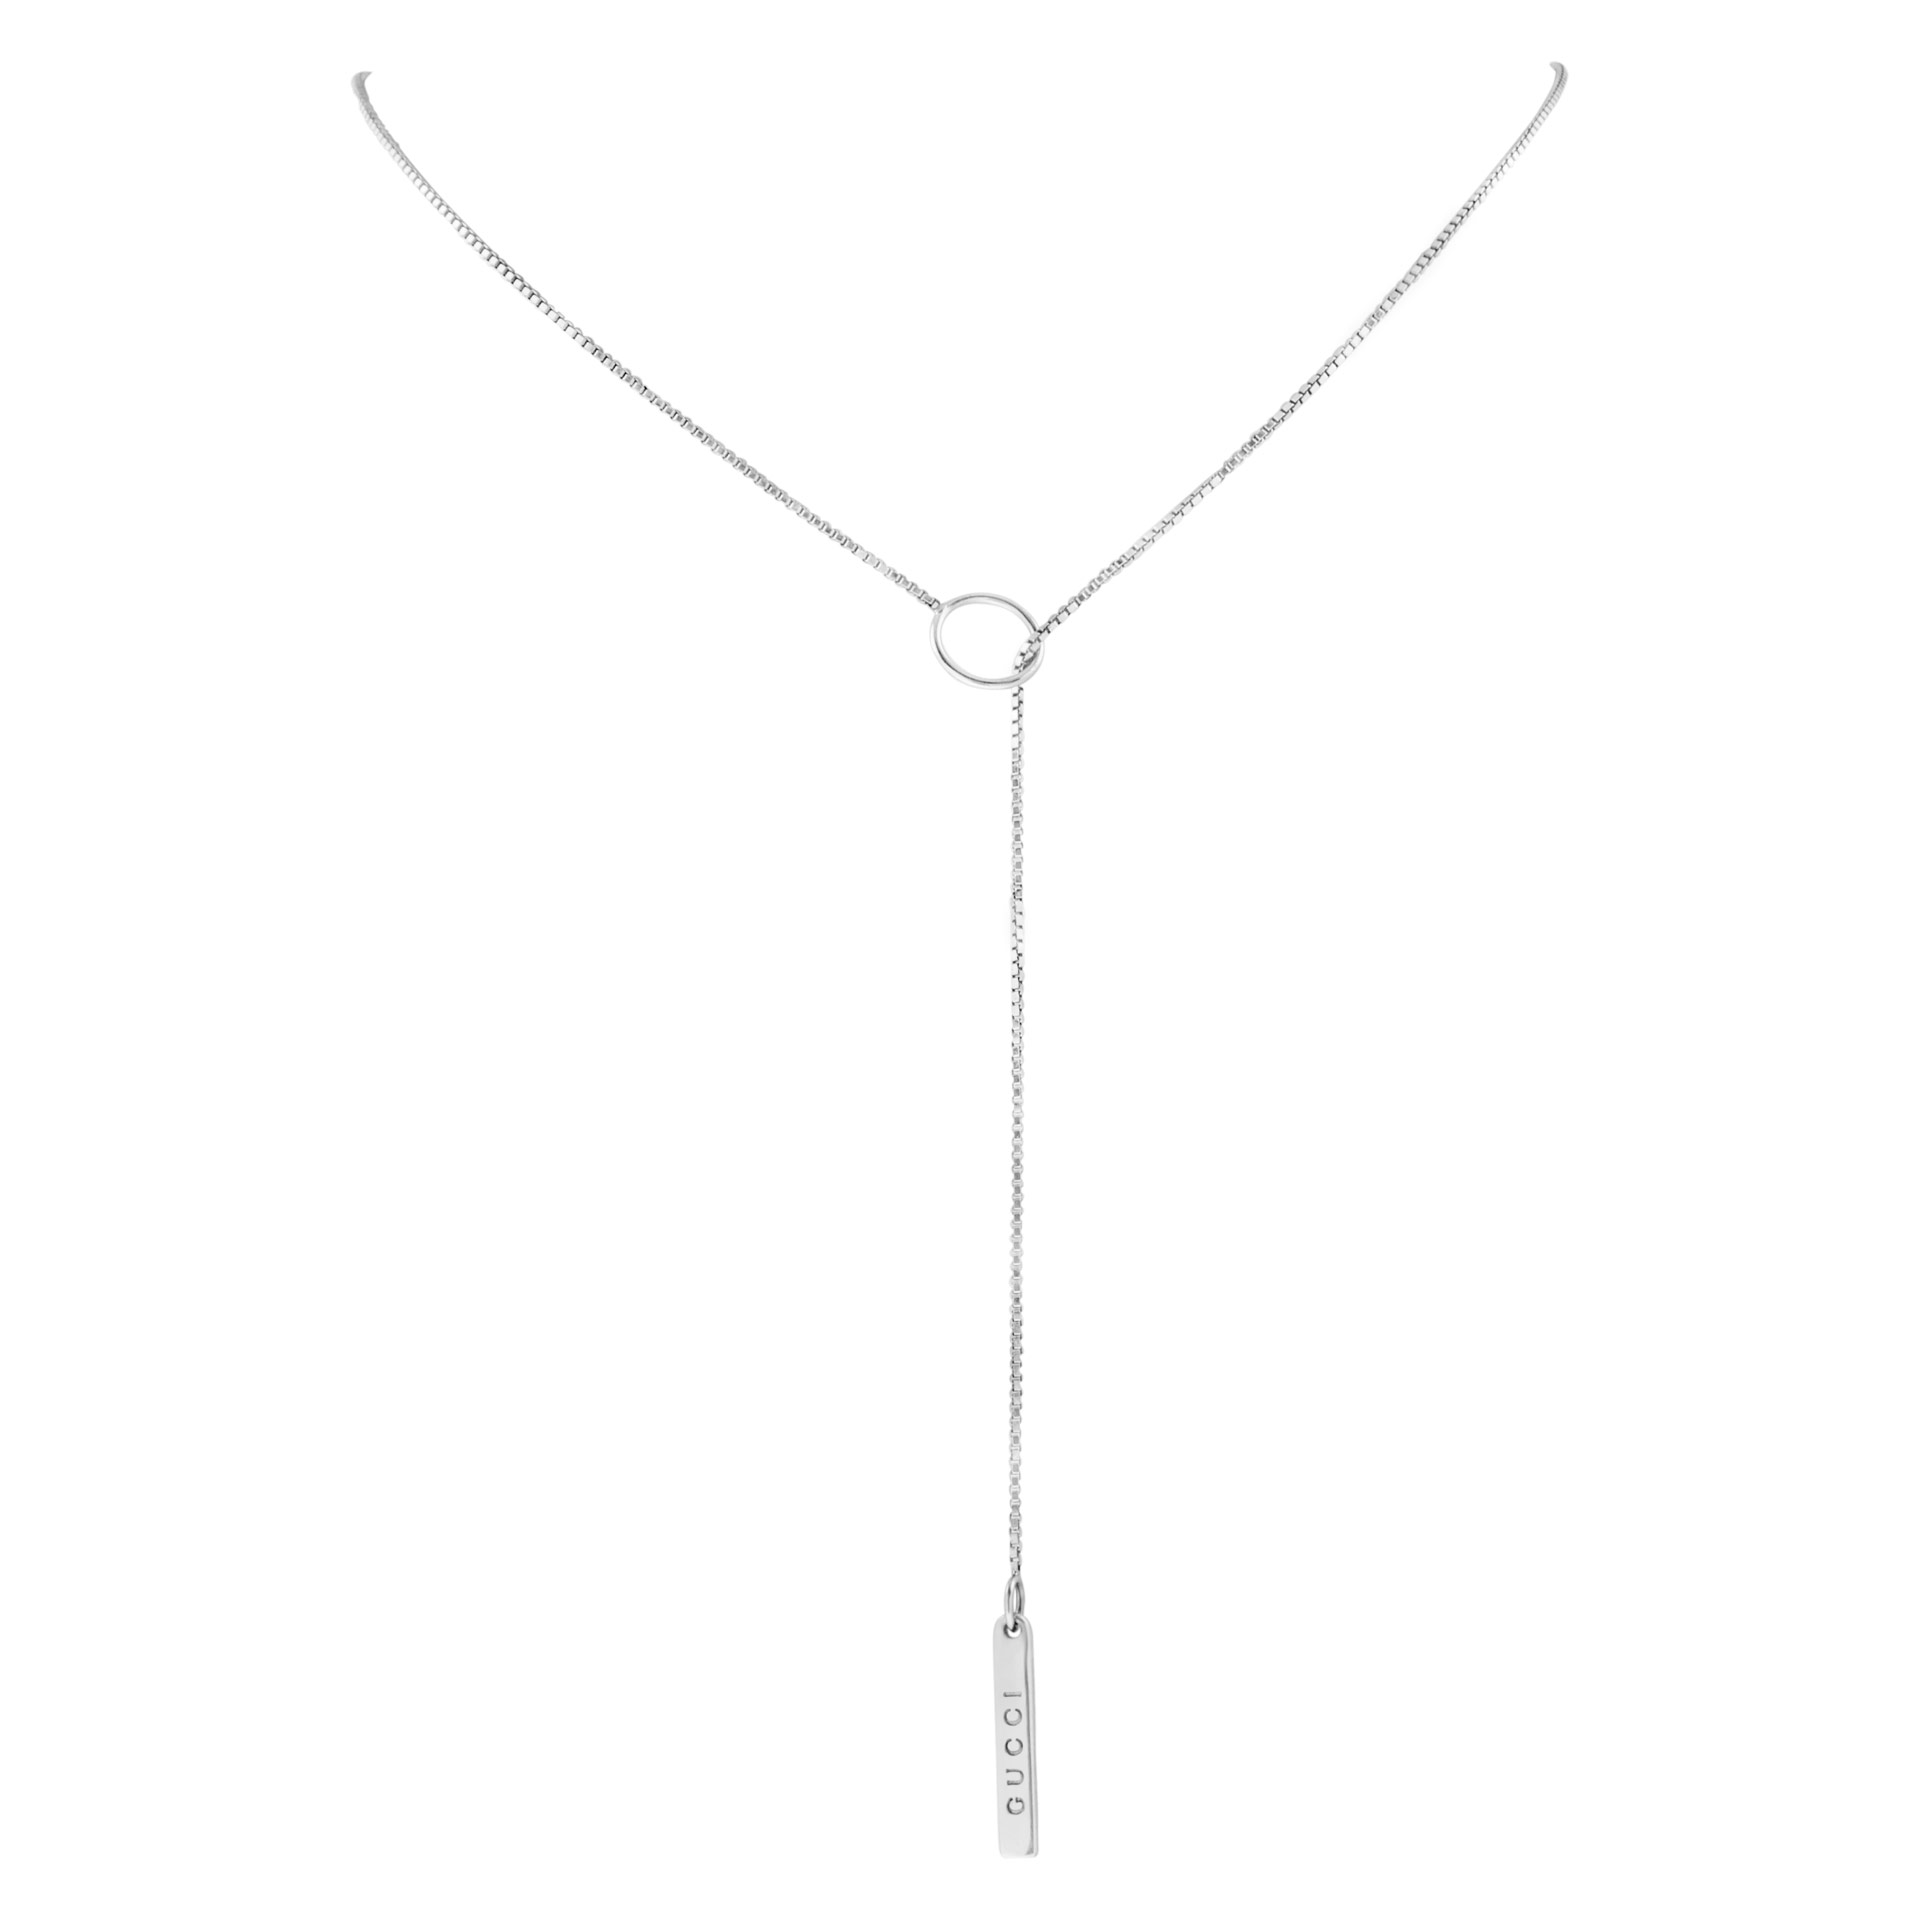 Gucci line 18k white gold necklace image 2